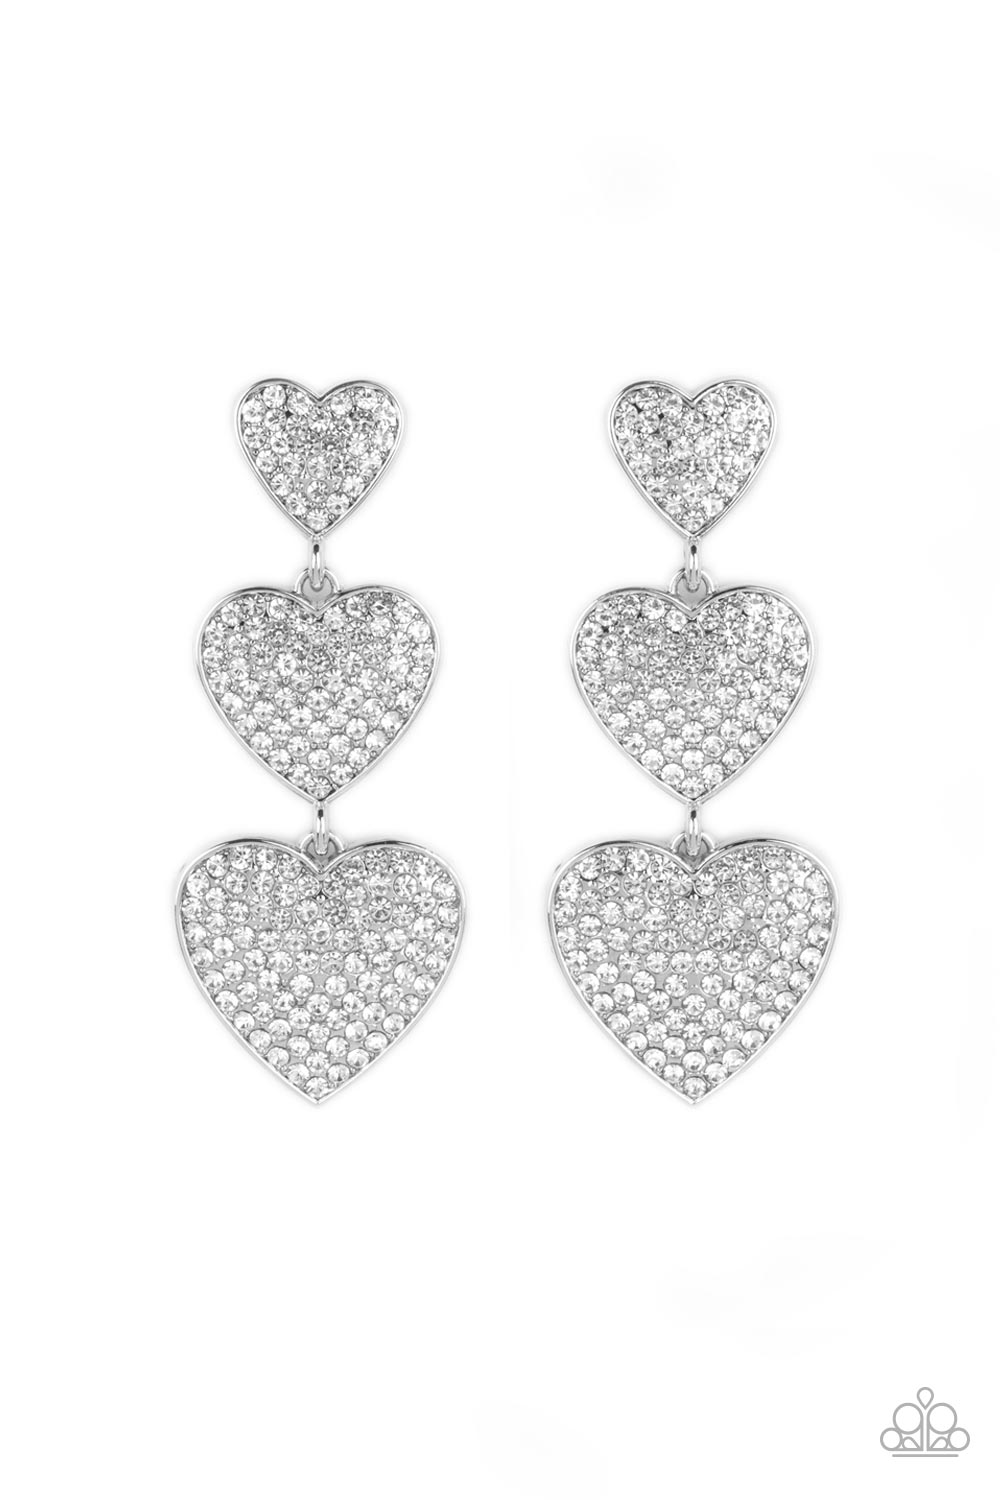 Couples Retreat White Heart Post Earring - Paparazzi Accessories  Three white rhinestone-studded silver hearts gradually increase in size as they cascade down the ear in a shimmery display. Each of the hearts interconnect to one another adding a shifting, whimsical detail to the spritz of glitz. Earring attaches to a standard post fitting.  Sold as one pair of post earrings.